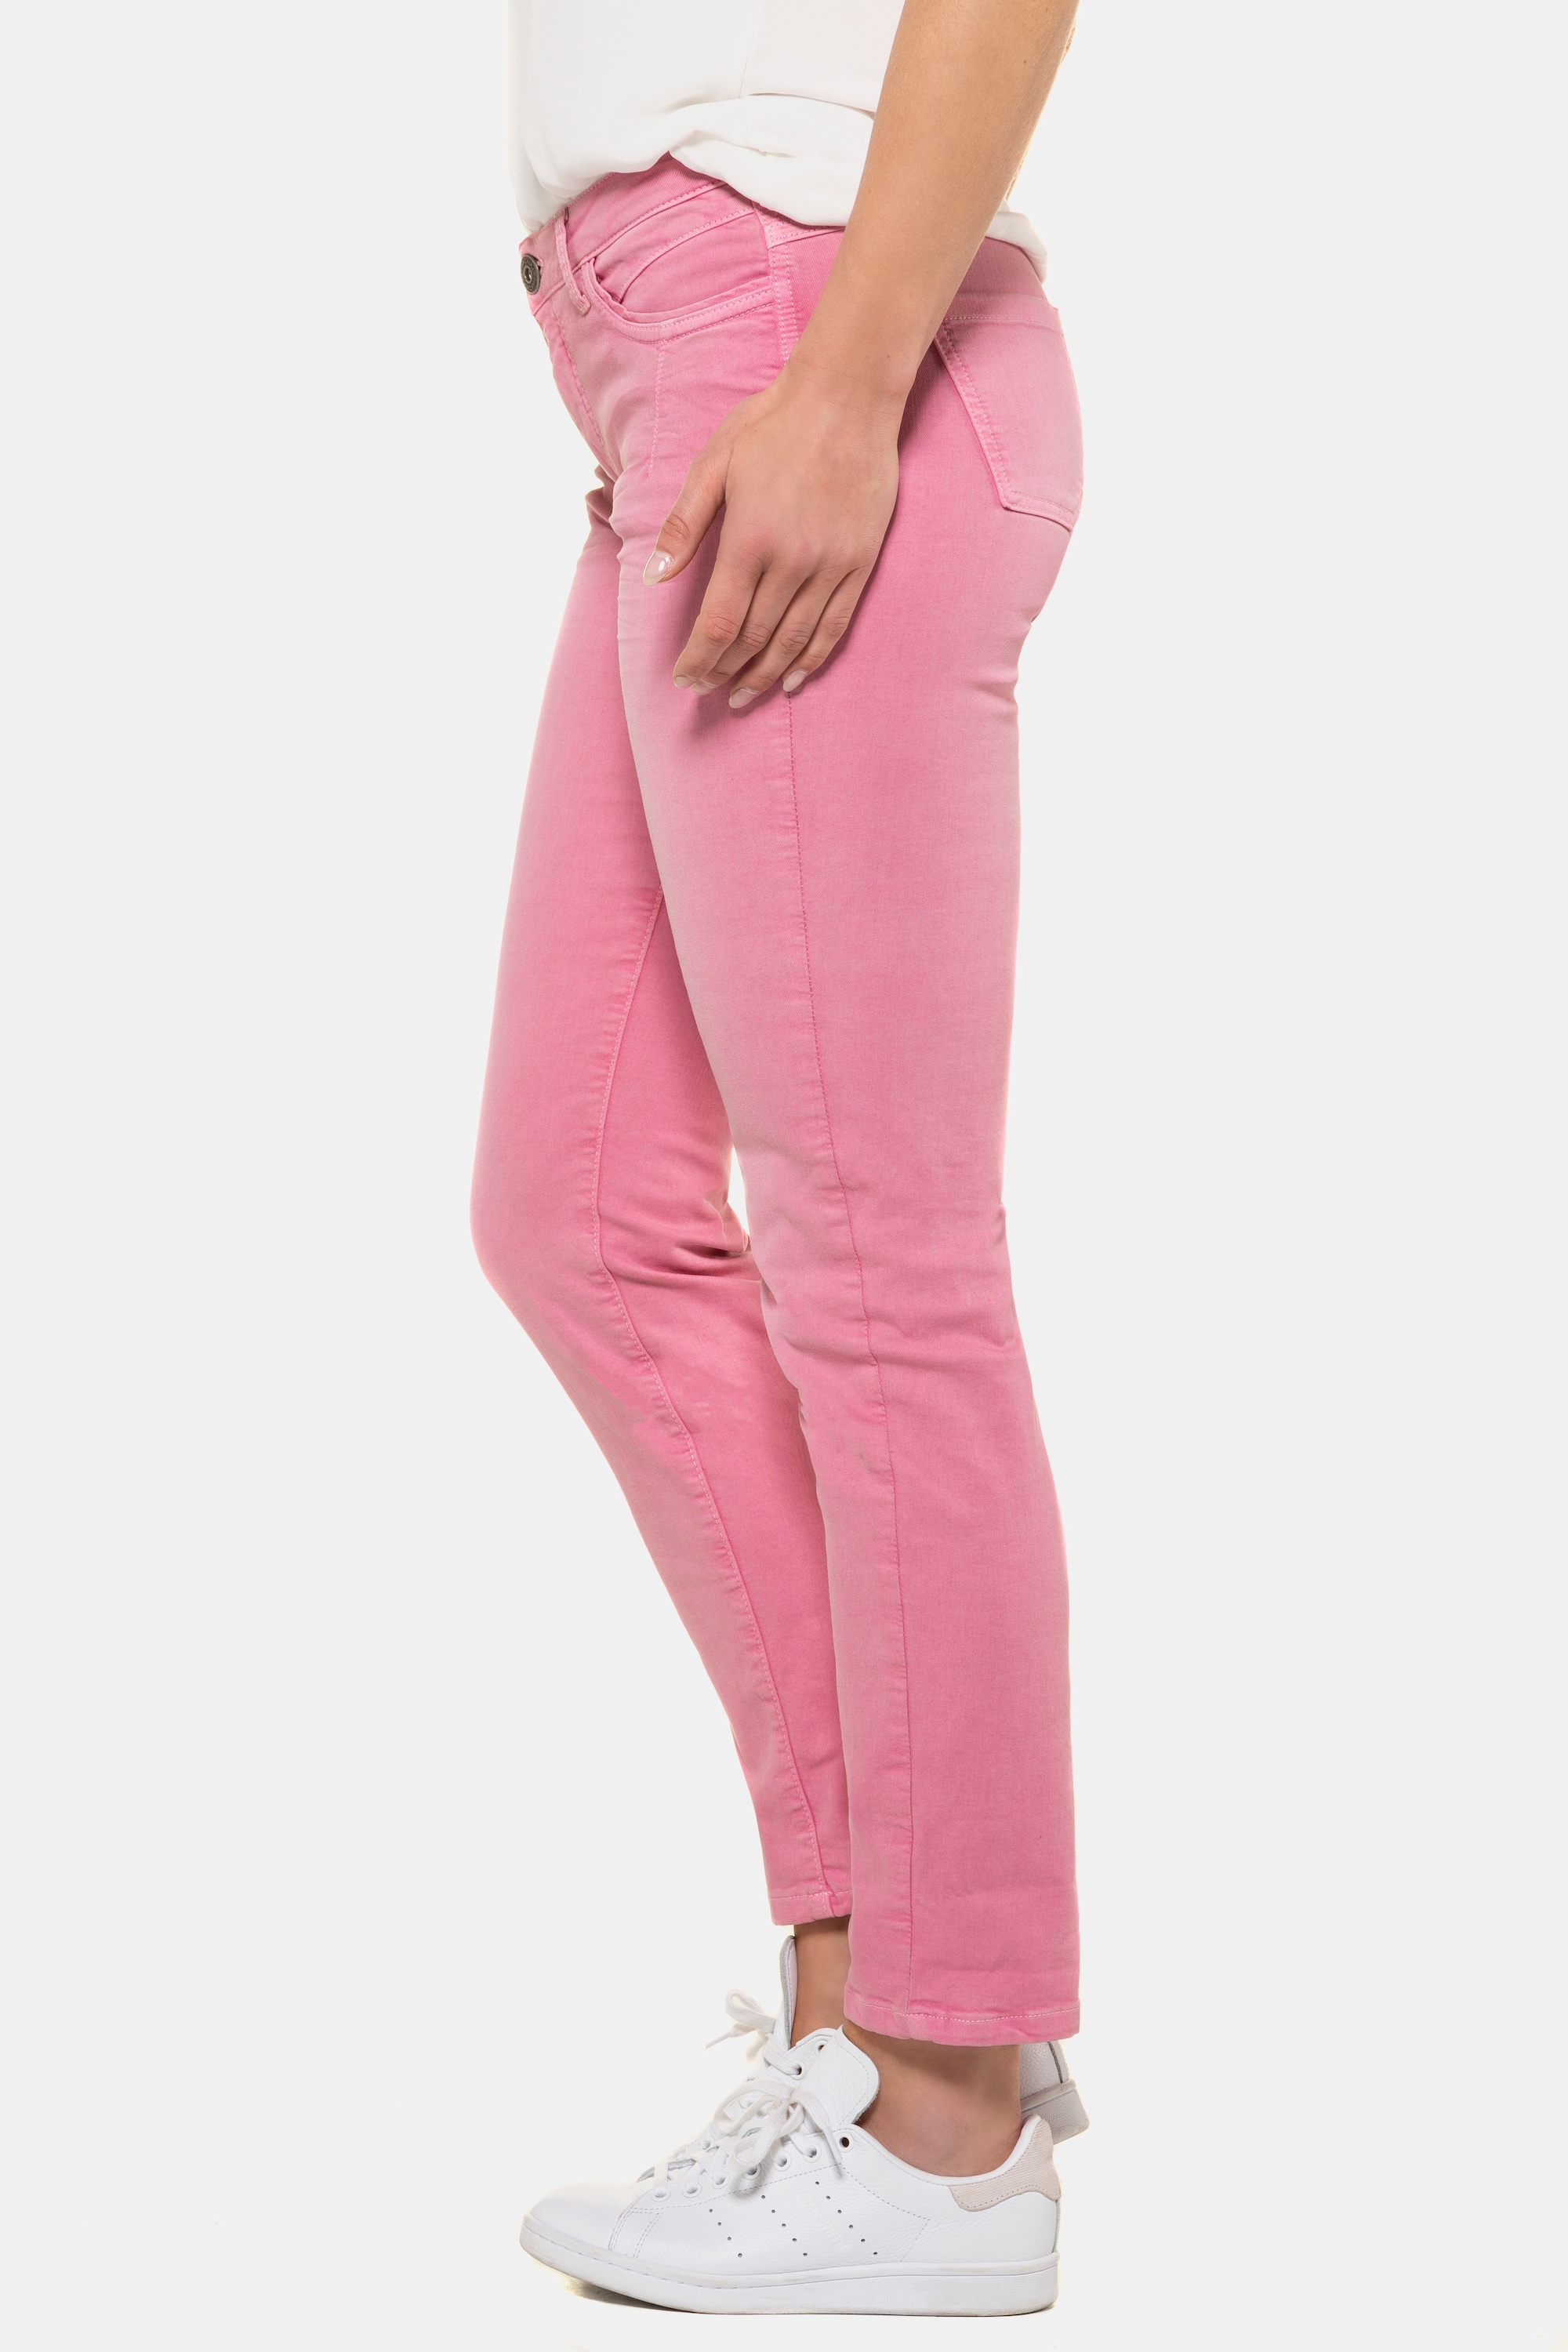 Gina Laura Jeans in Pink 